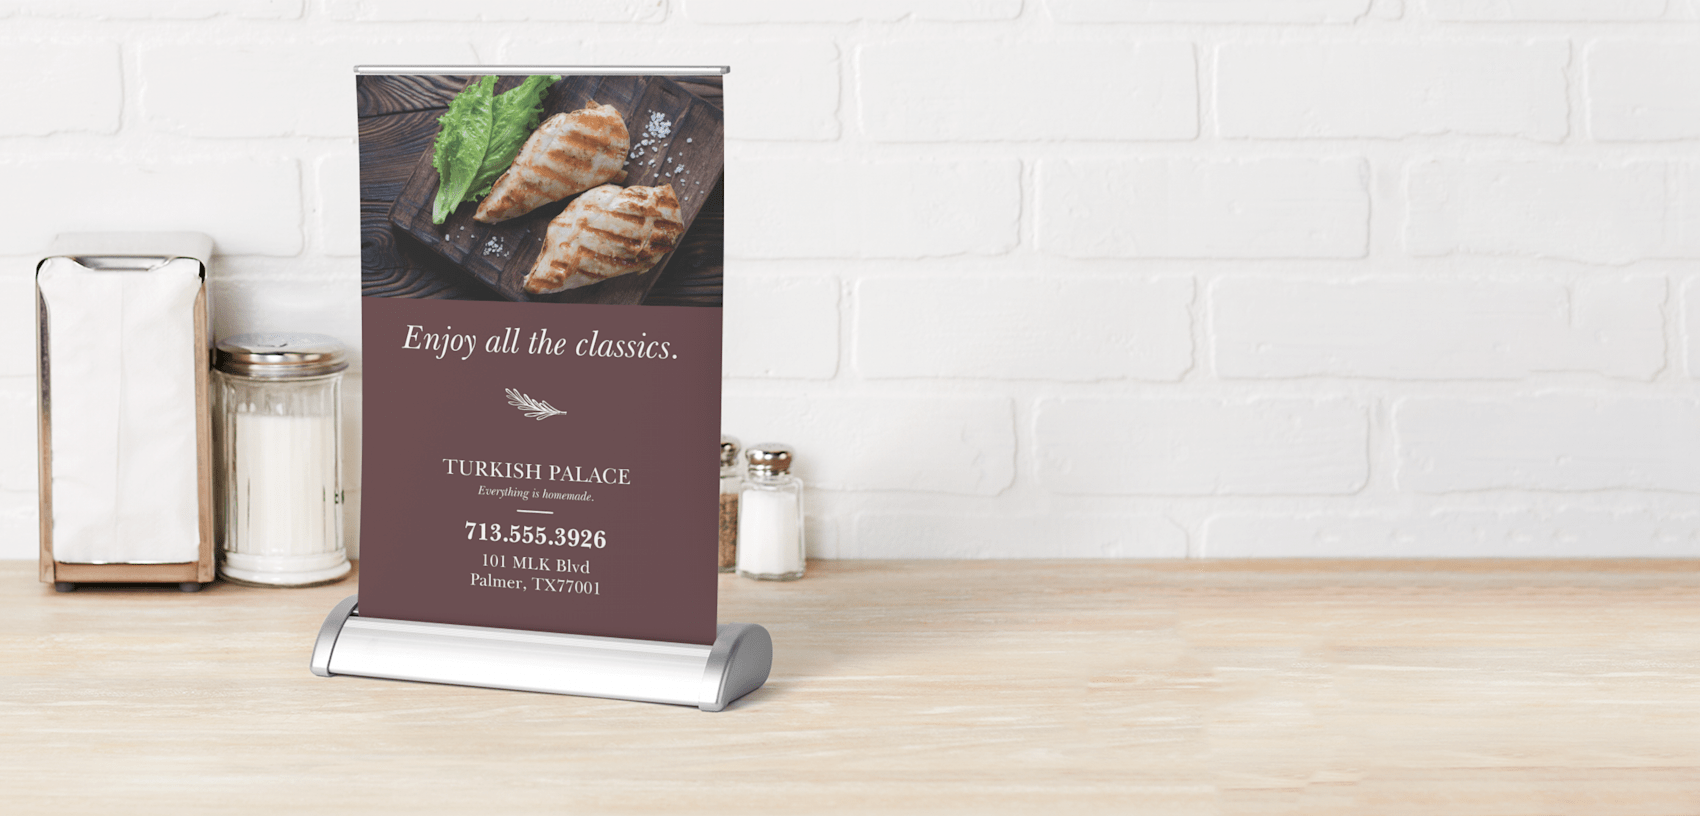 Larger version: tabletop retractable banners for restaurants